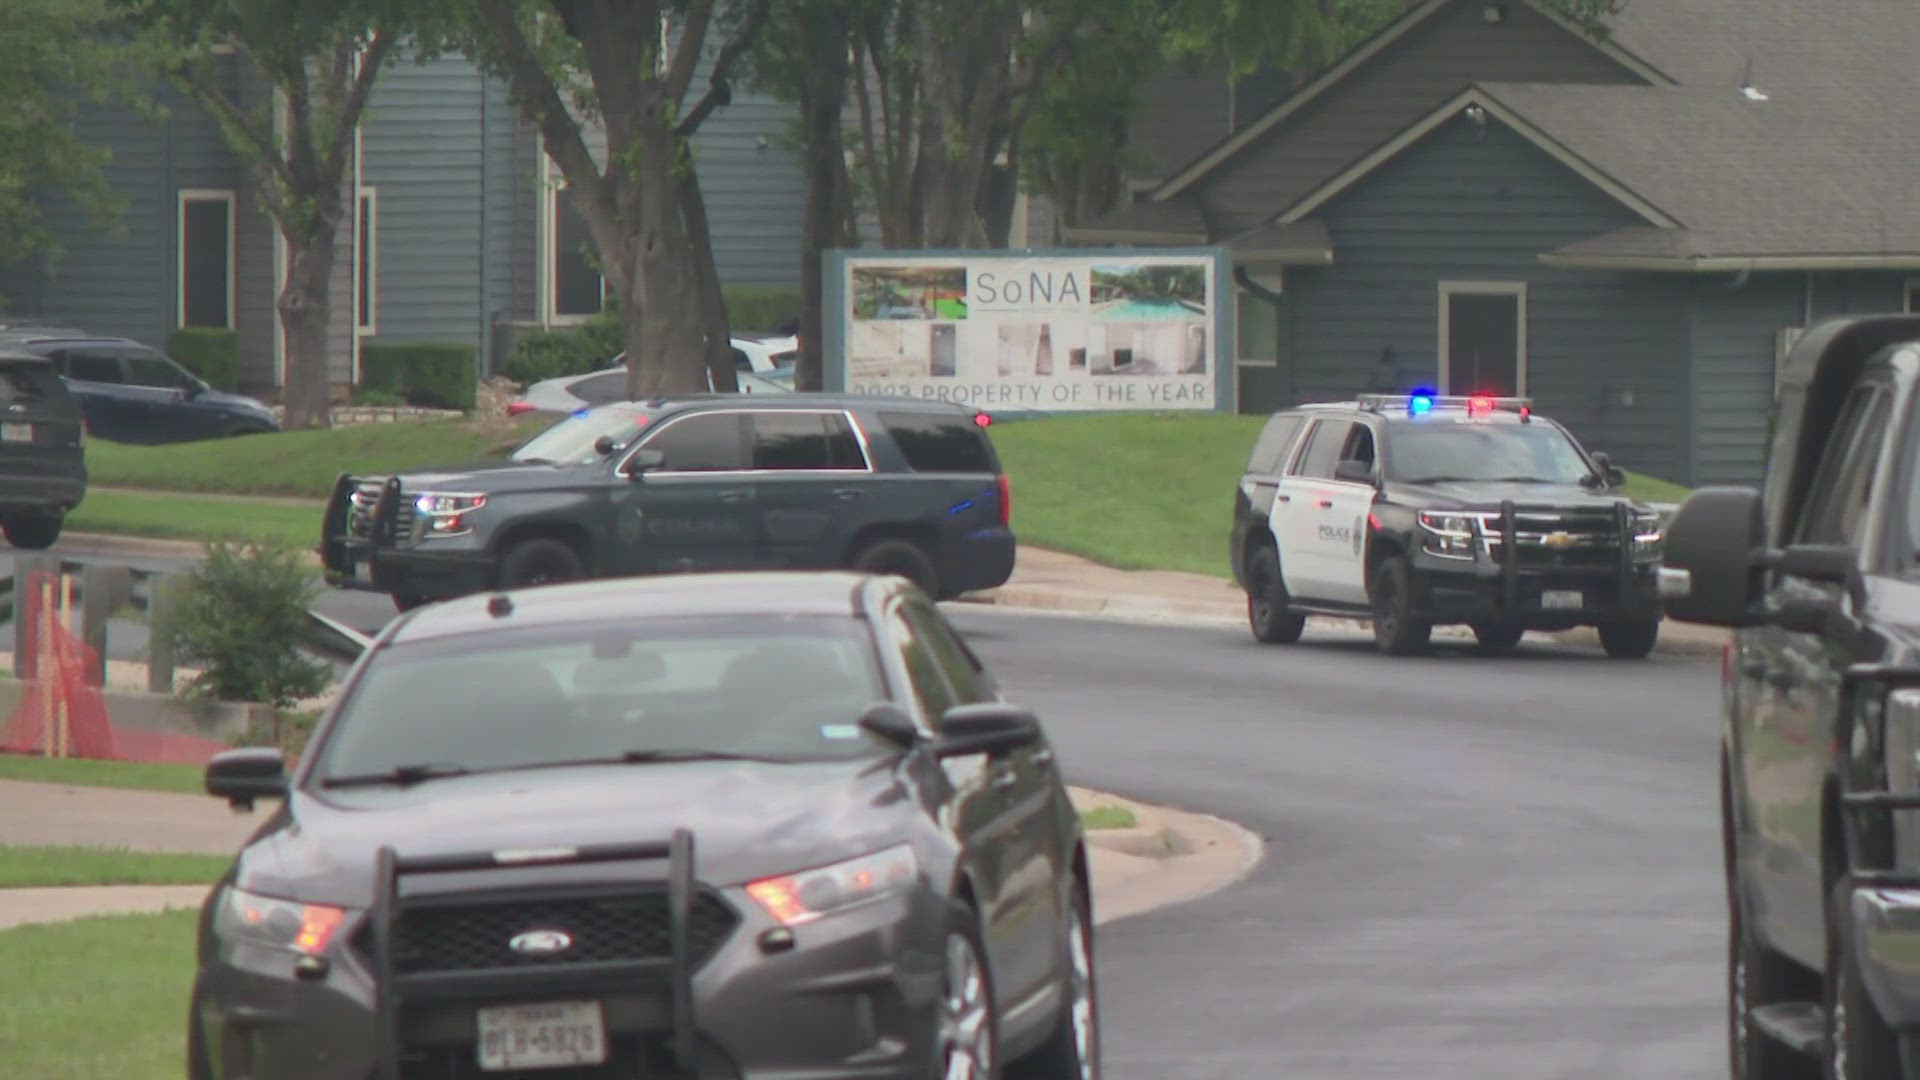 One person is dead after a shooting involving an Austin Police Department officer early Saturday morning.